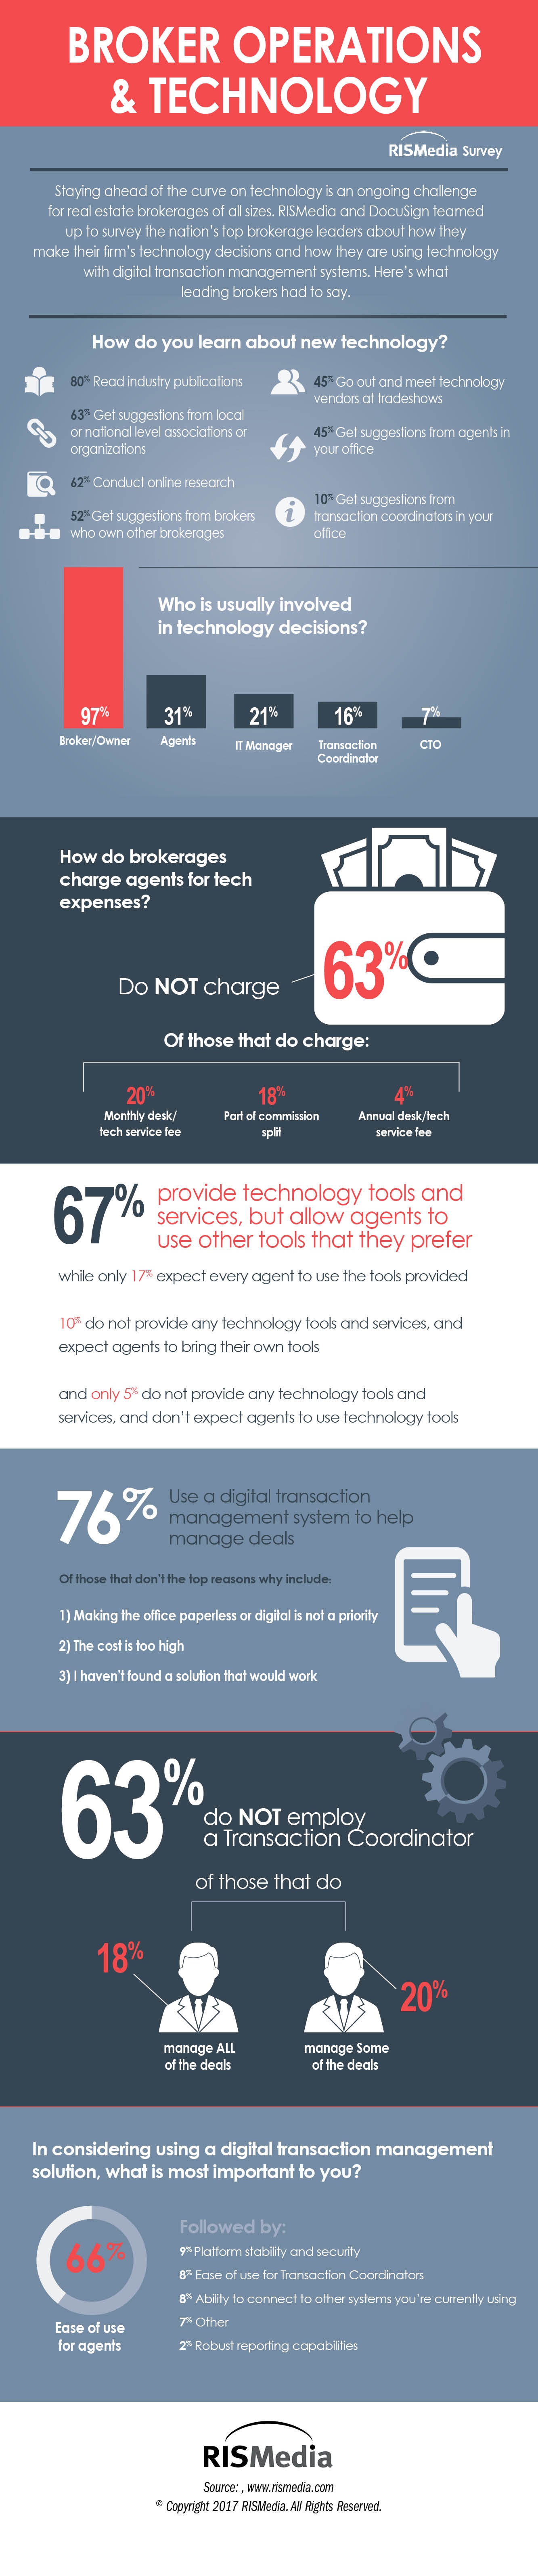 Survey Results: Broker Operations and Technology | RISMedia\'s Housecall